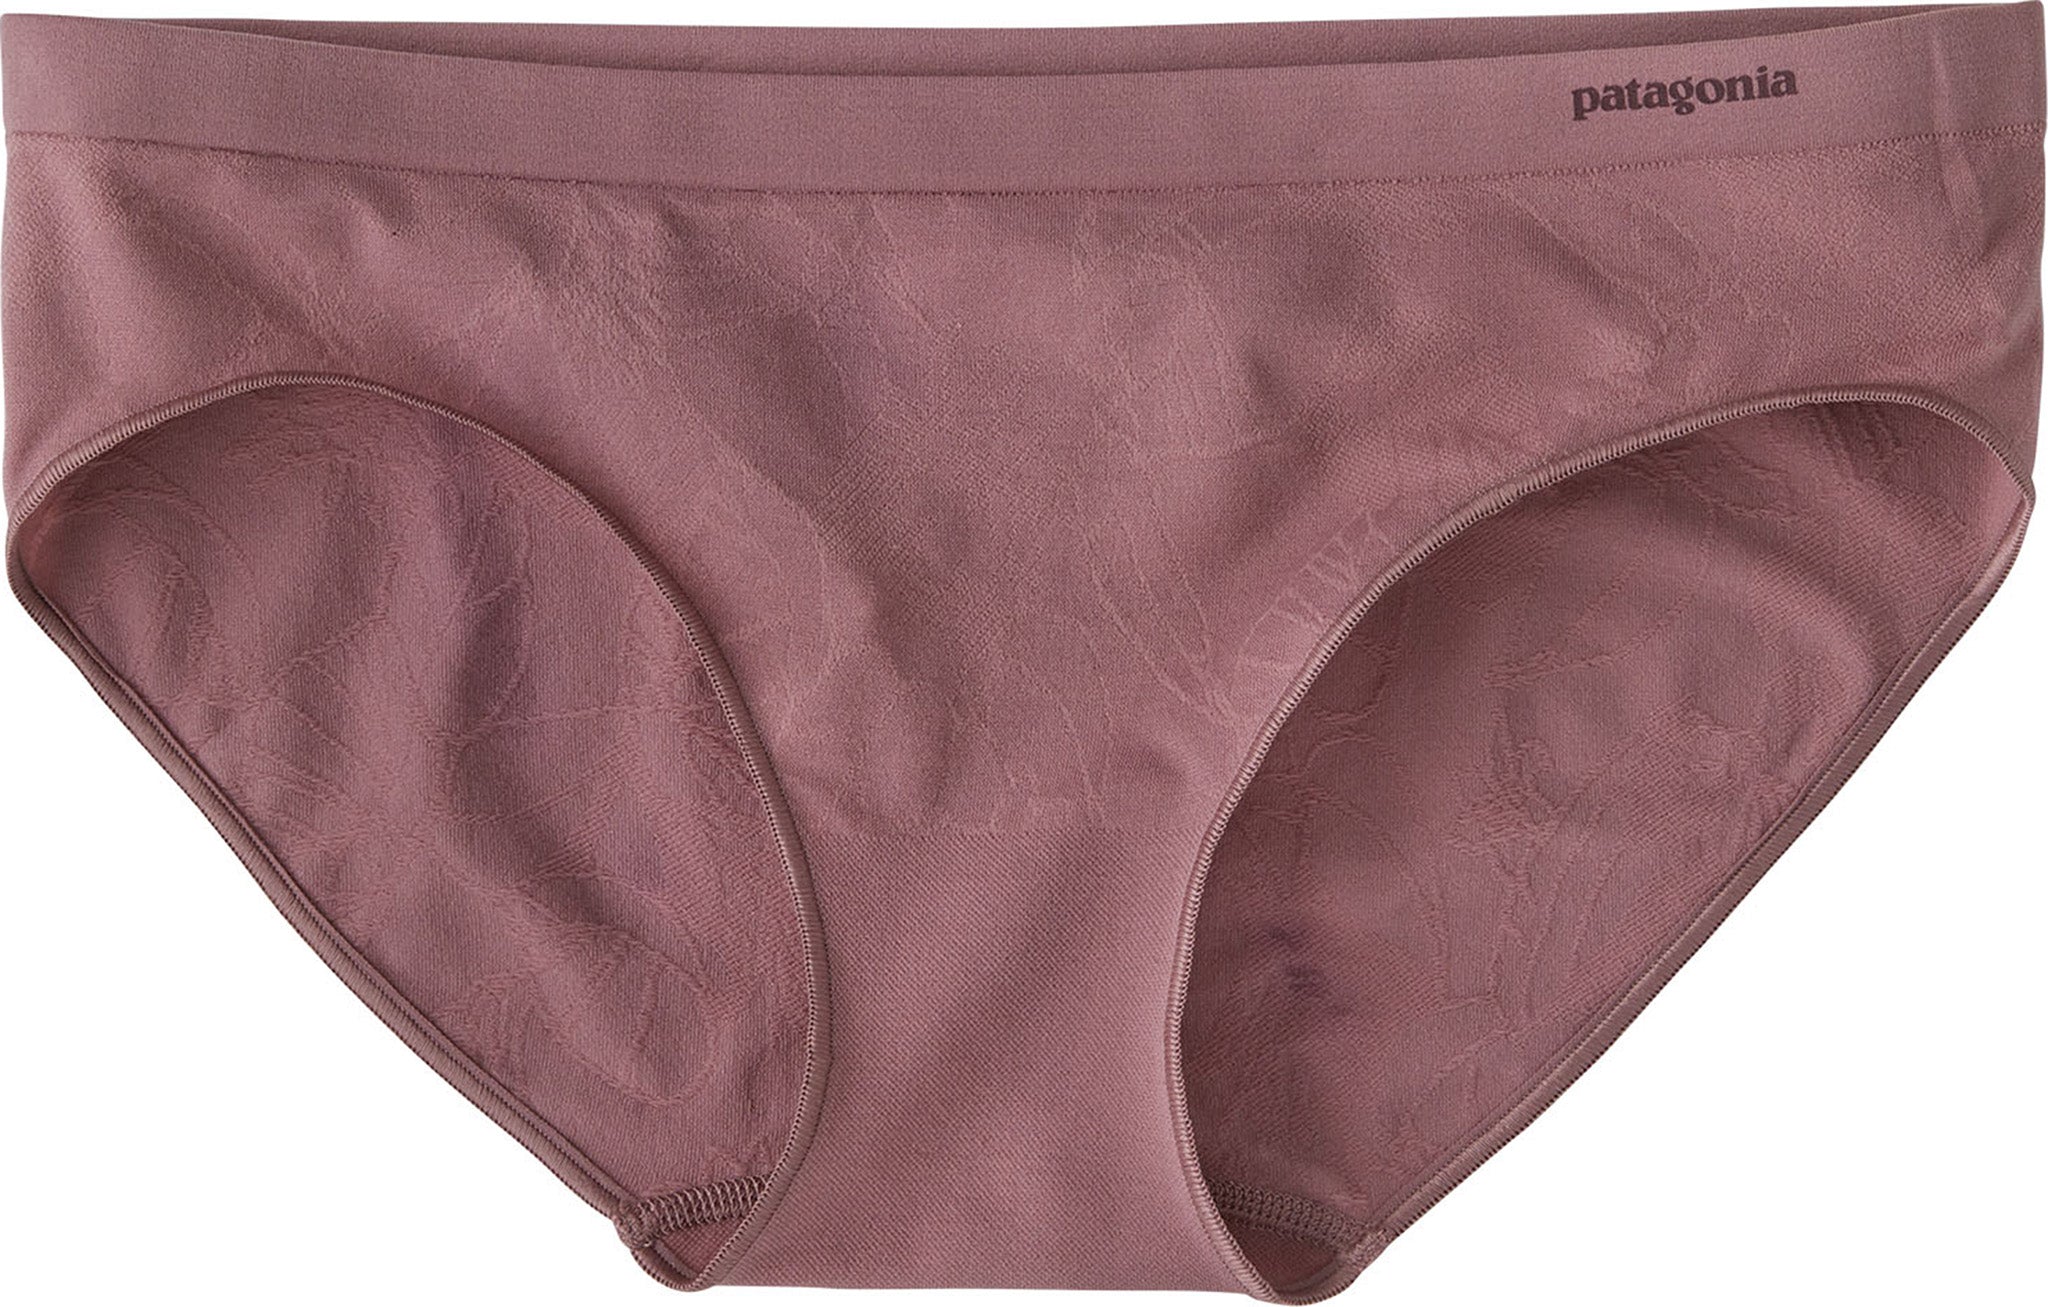 Patagonia Barely Hipster Underwear - Women's  Outdoor Clothing & Gear For  Skiing, Camping And Climbing